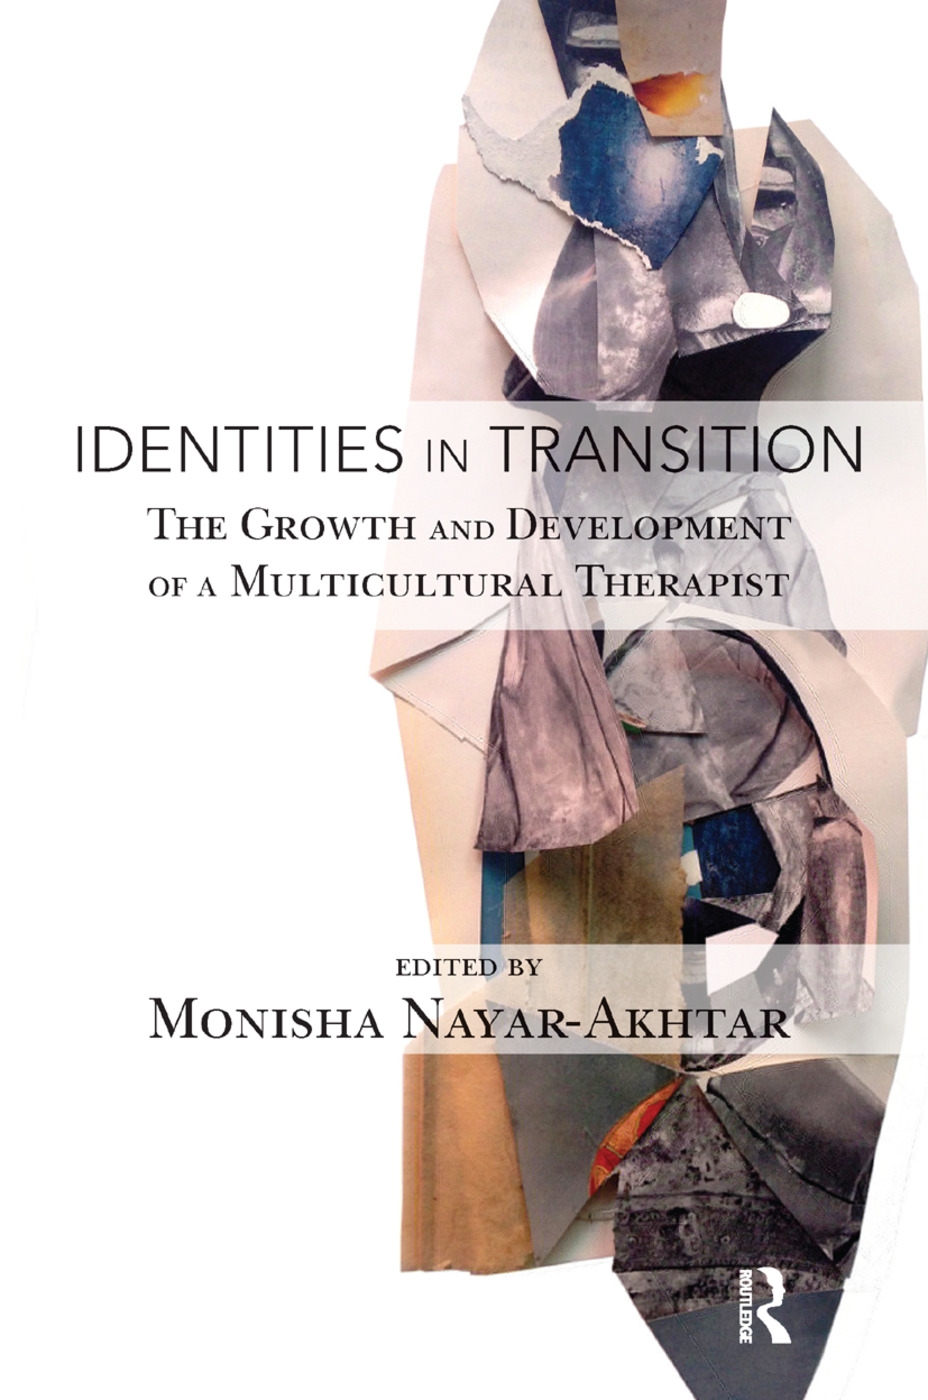 Identities in Transition: The Growth and Development of a Multicultural Therapist